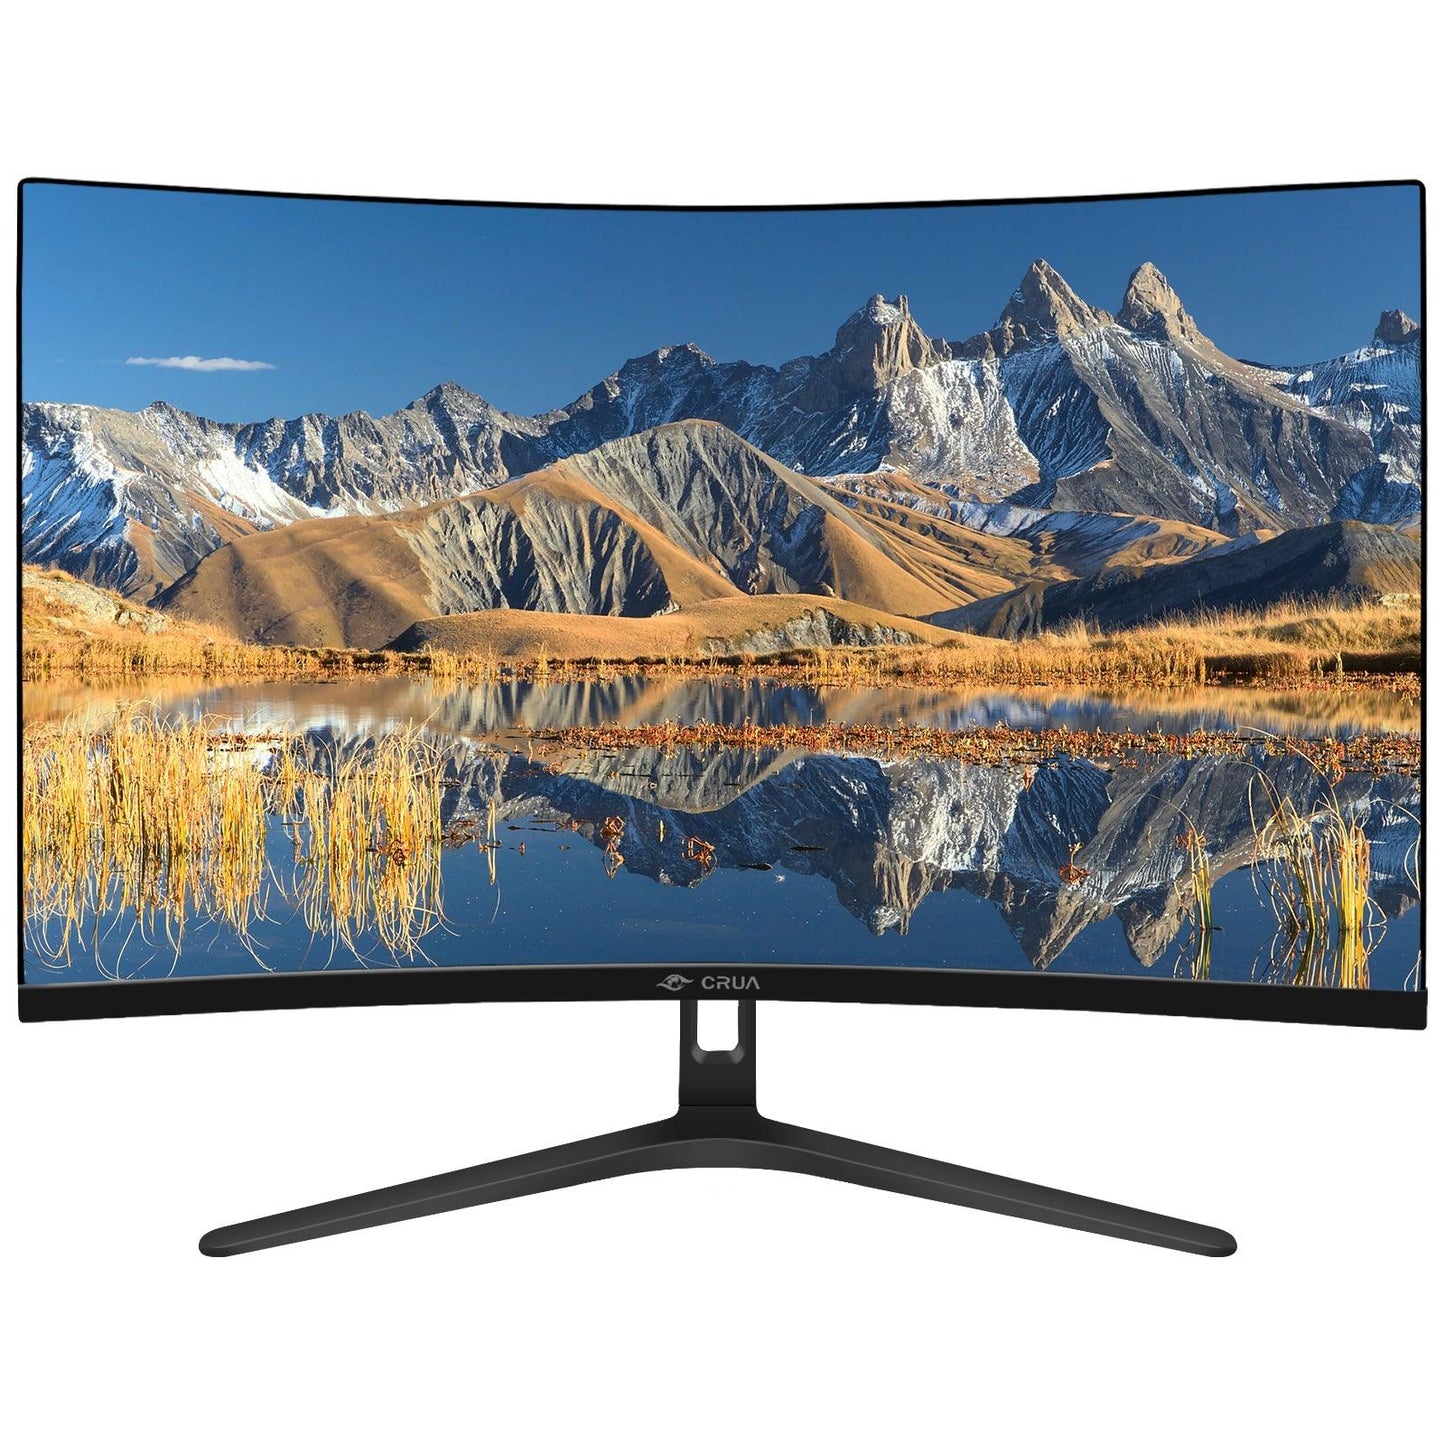 Load image into Gallery viewer, CRUA 27 1K VA Panel 1800R High Color Gamut Professional Monitor
